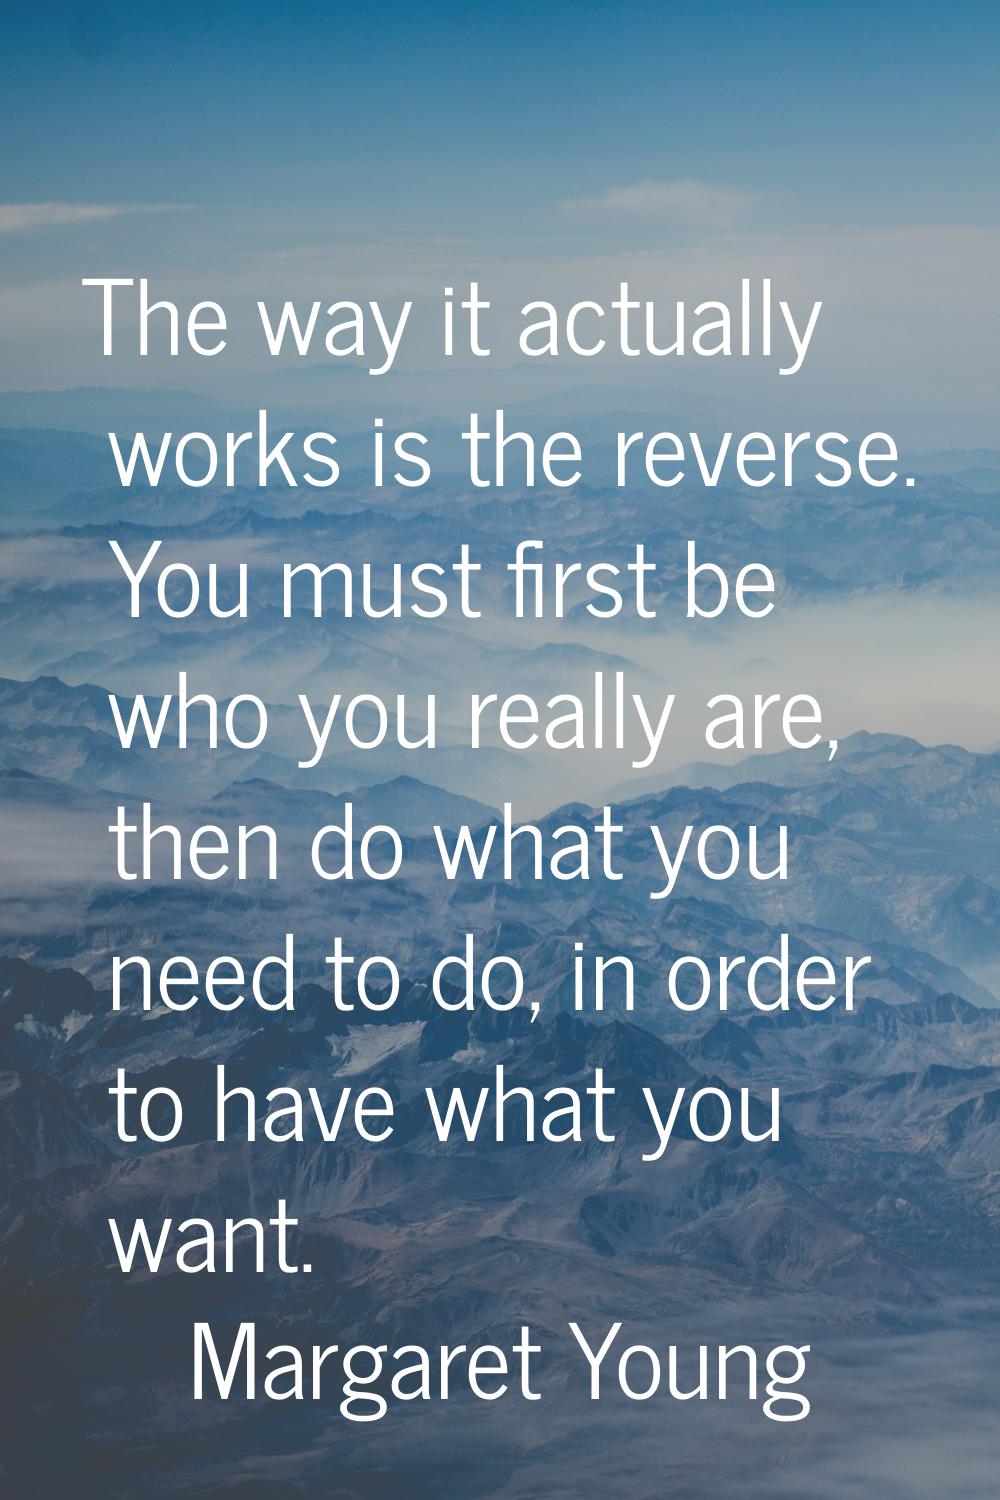 The way it actually works is the reverse. You must first be who you really are, then do what you ne